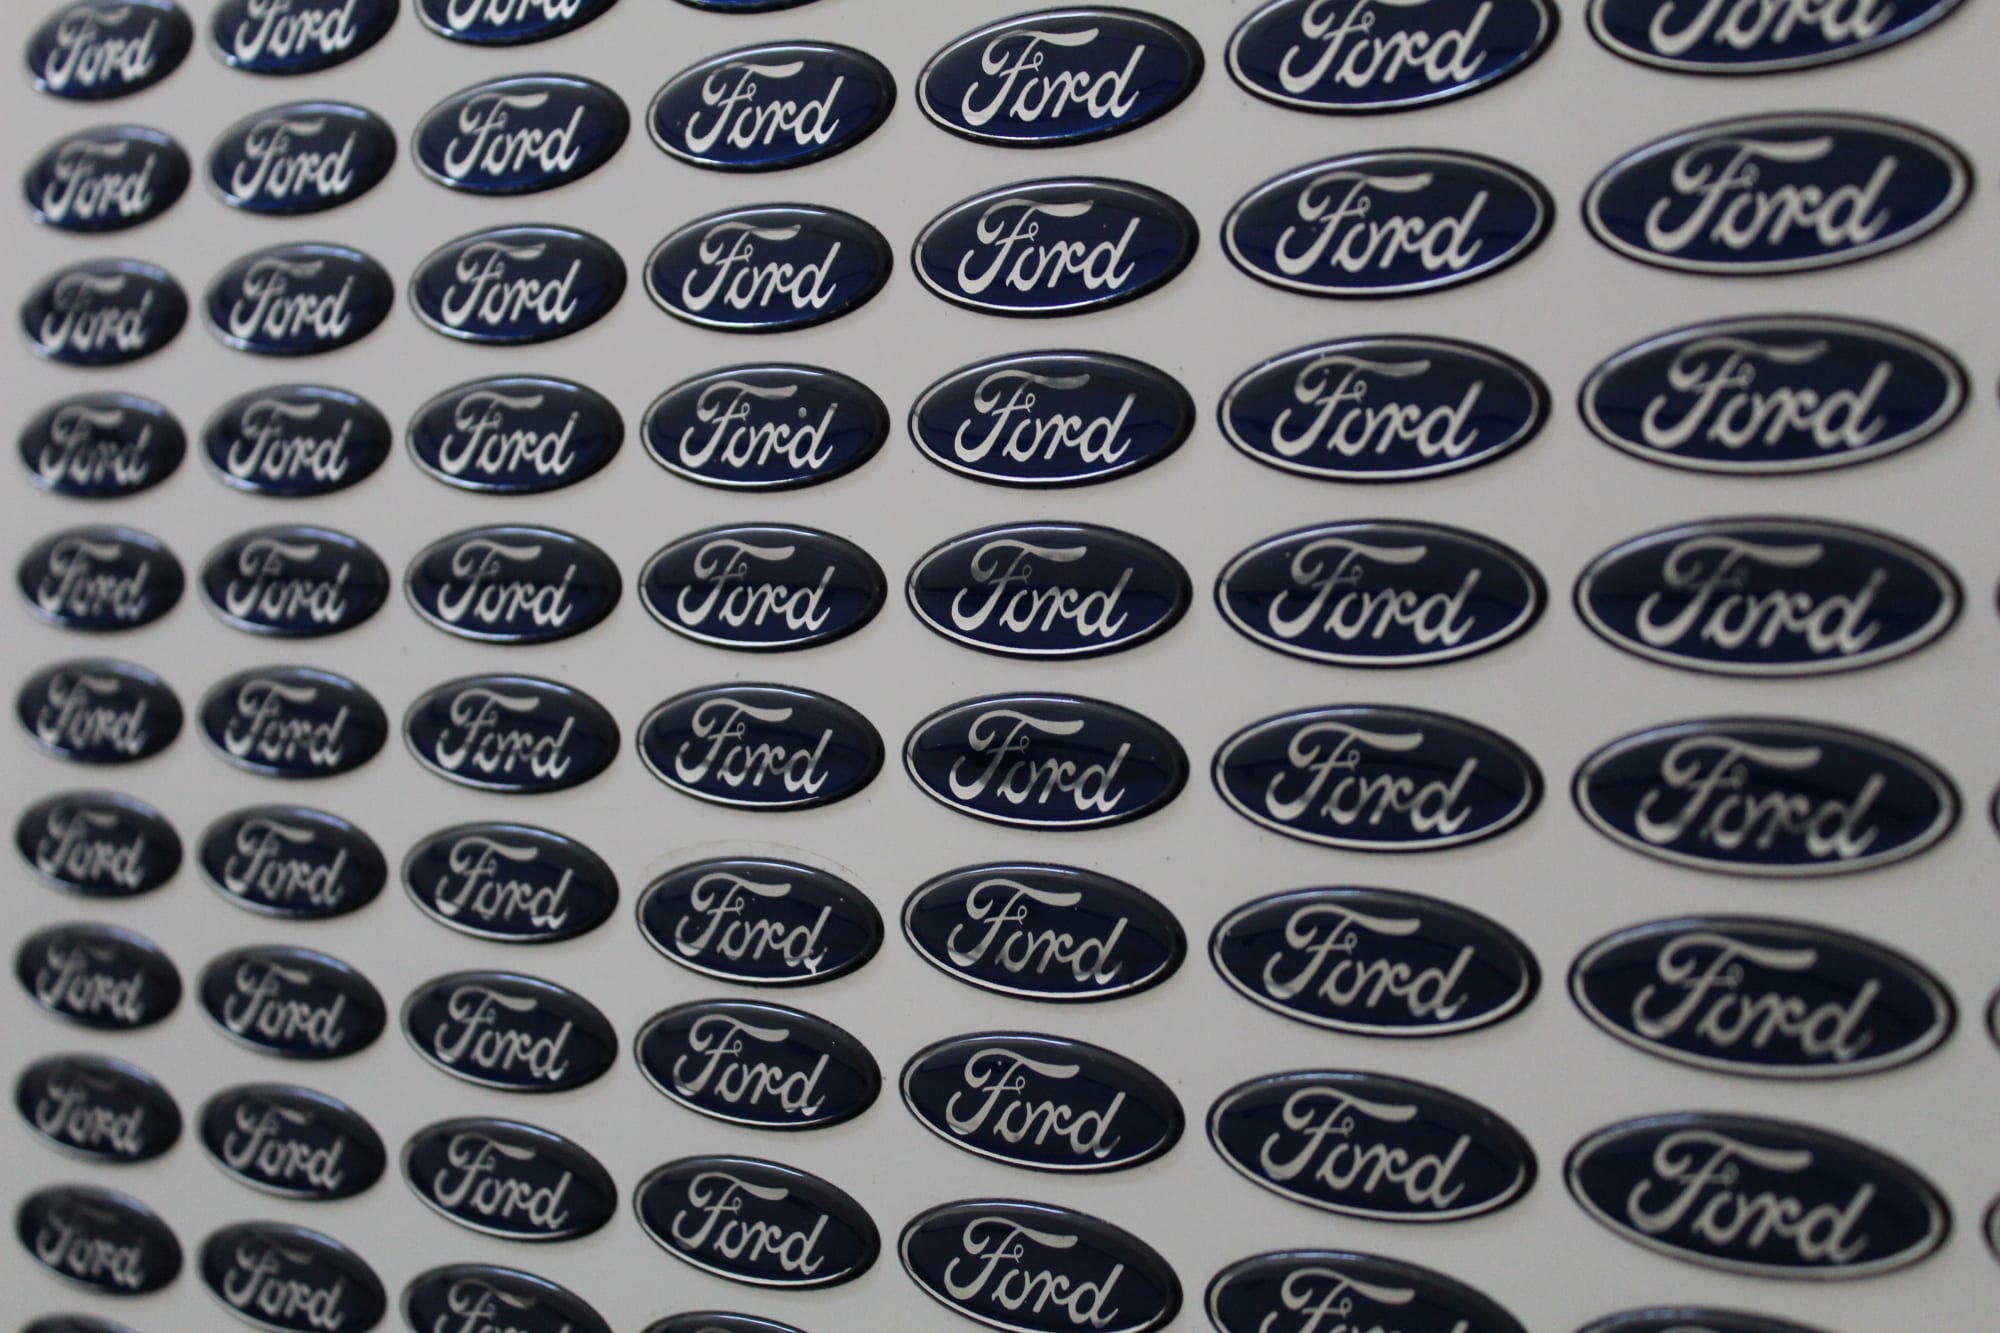 Innovative Adhesive Car Badges for Car/Motorcycle Dealerships